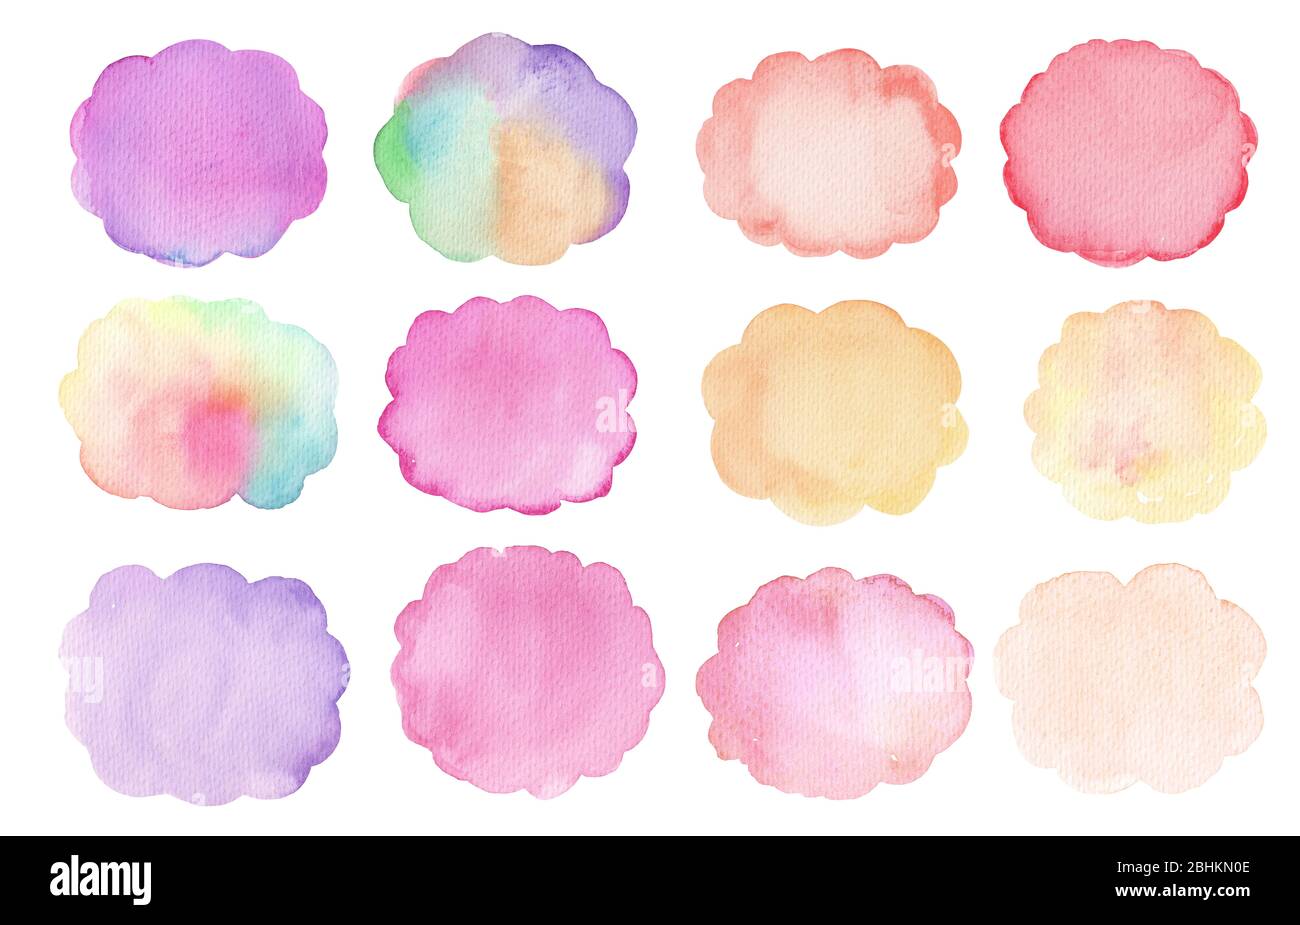 Watercolor set of colorful stains. Red, pink, yellow, orange, purple watercolor stains. Hand painted abstract texture backgrounds. Hand drawn illustra Stock Photo